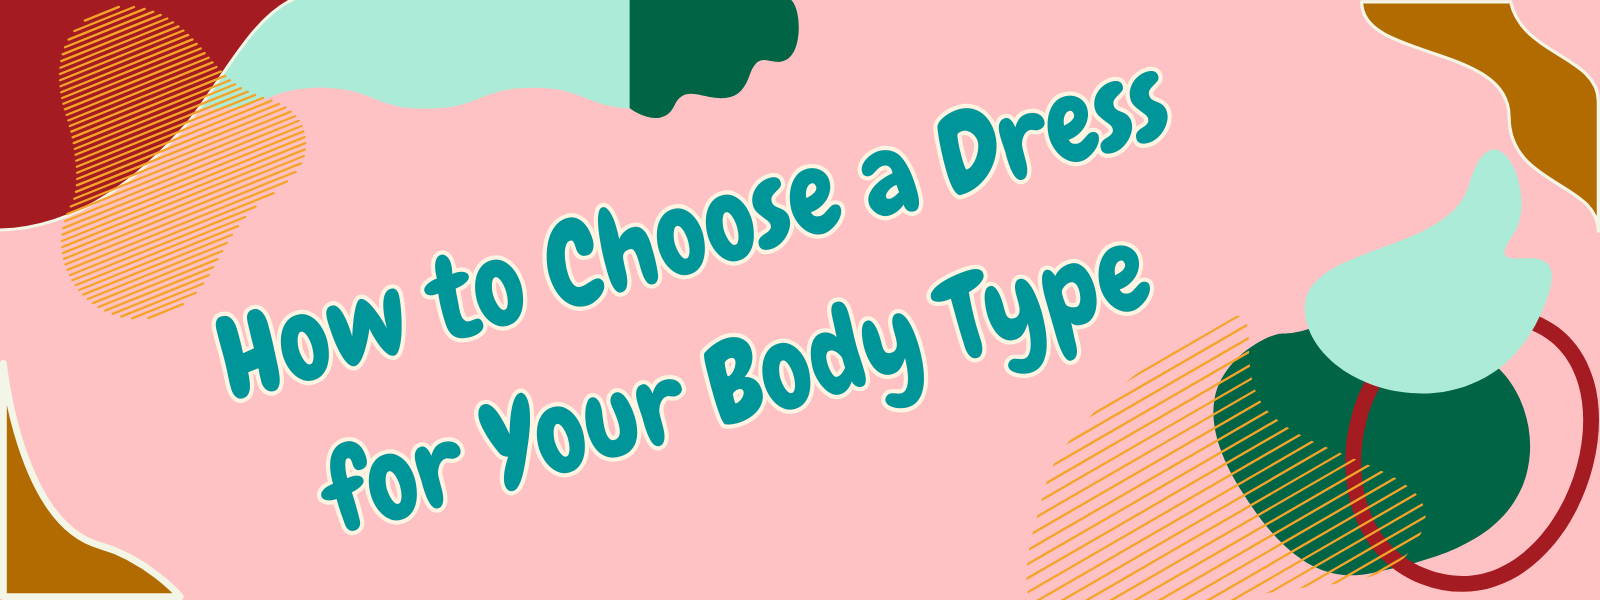 How to Choose a Dress for Your Body Type